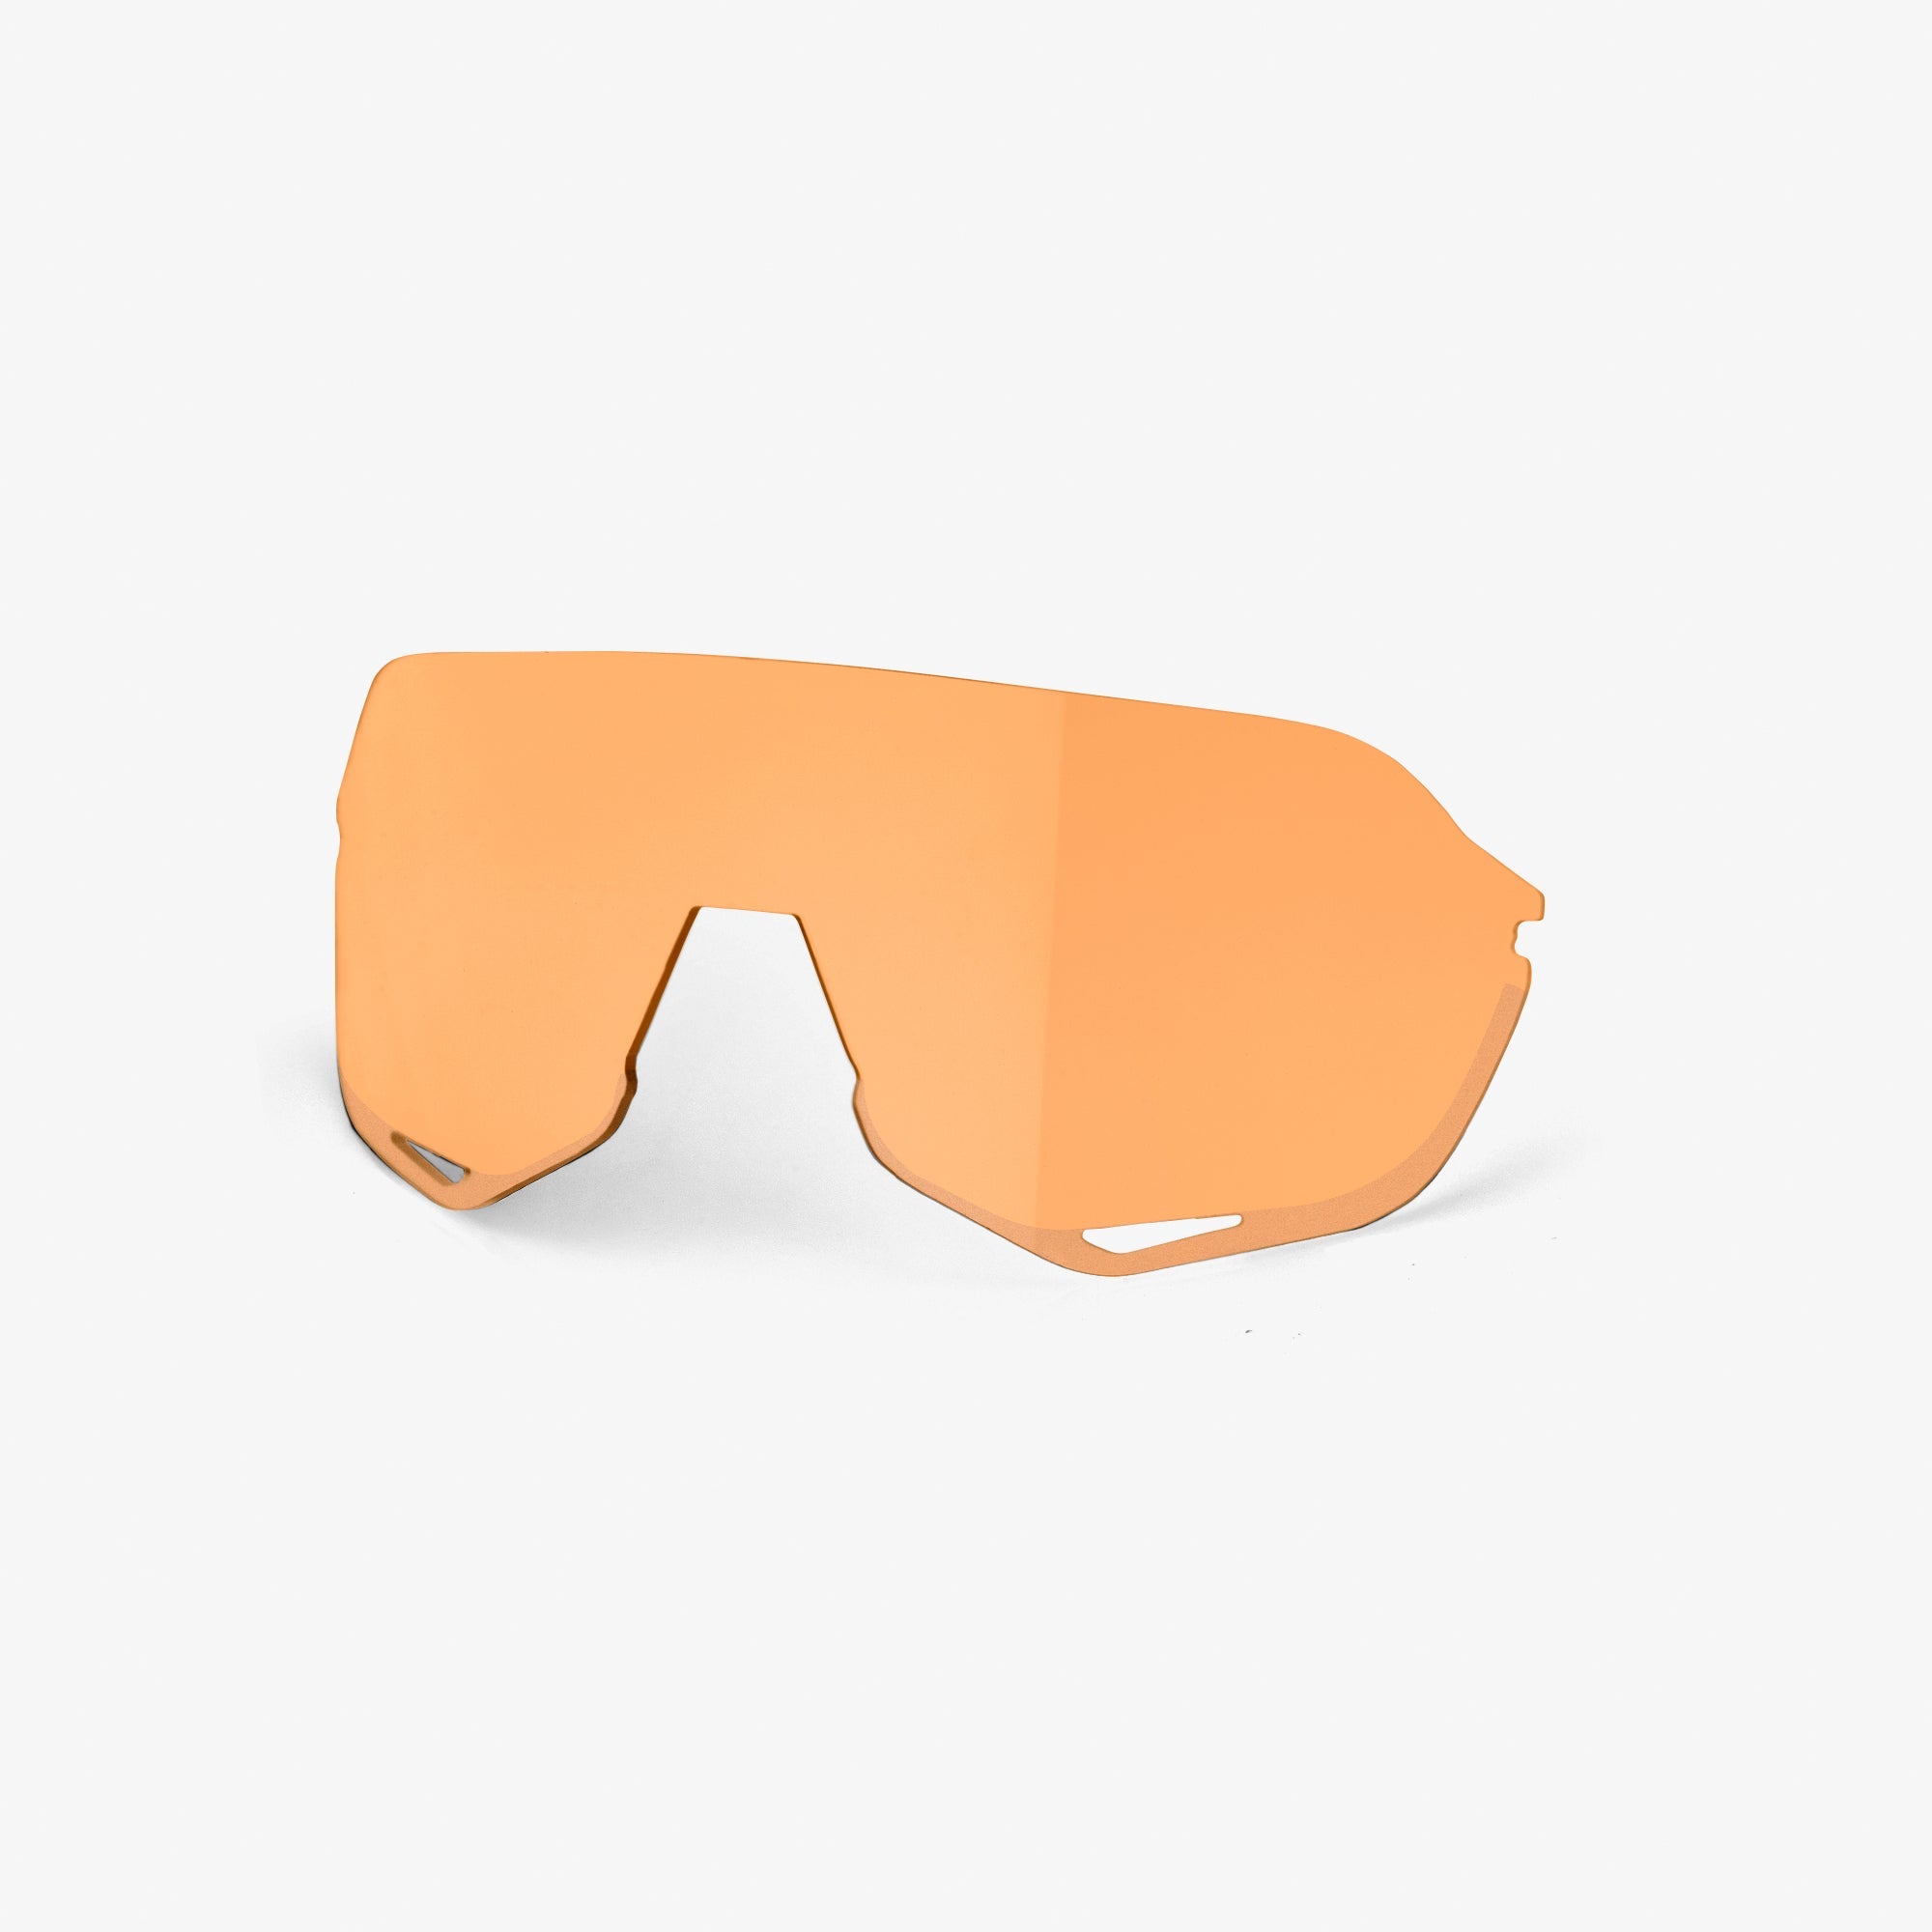 S2 REPLACEMENT LENS - Persimmon